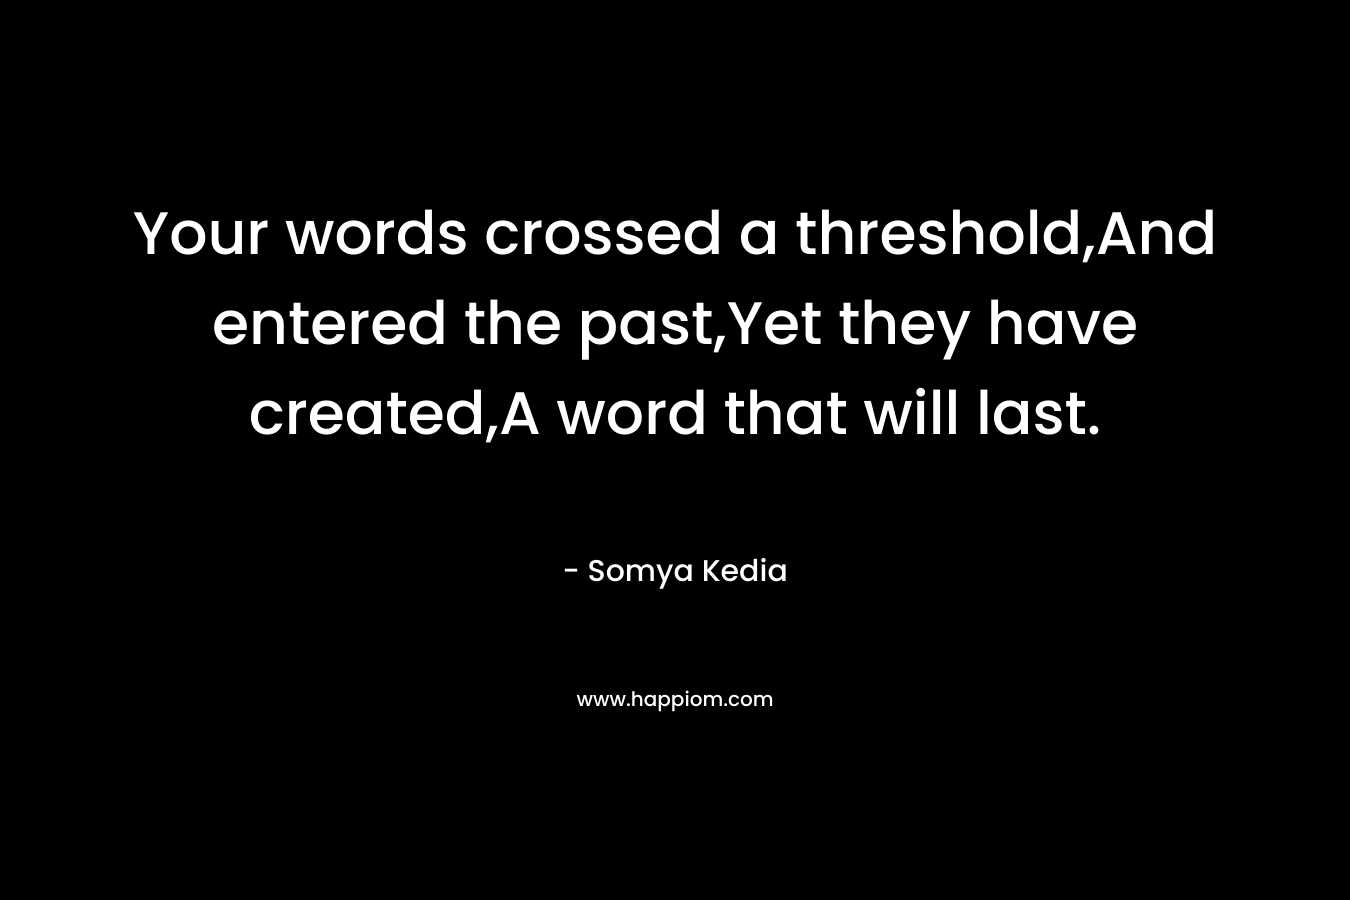 Your words crossed a threshold,And entered the past,Yet they have created,A word that will last.